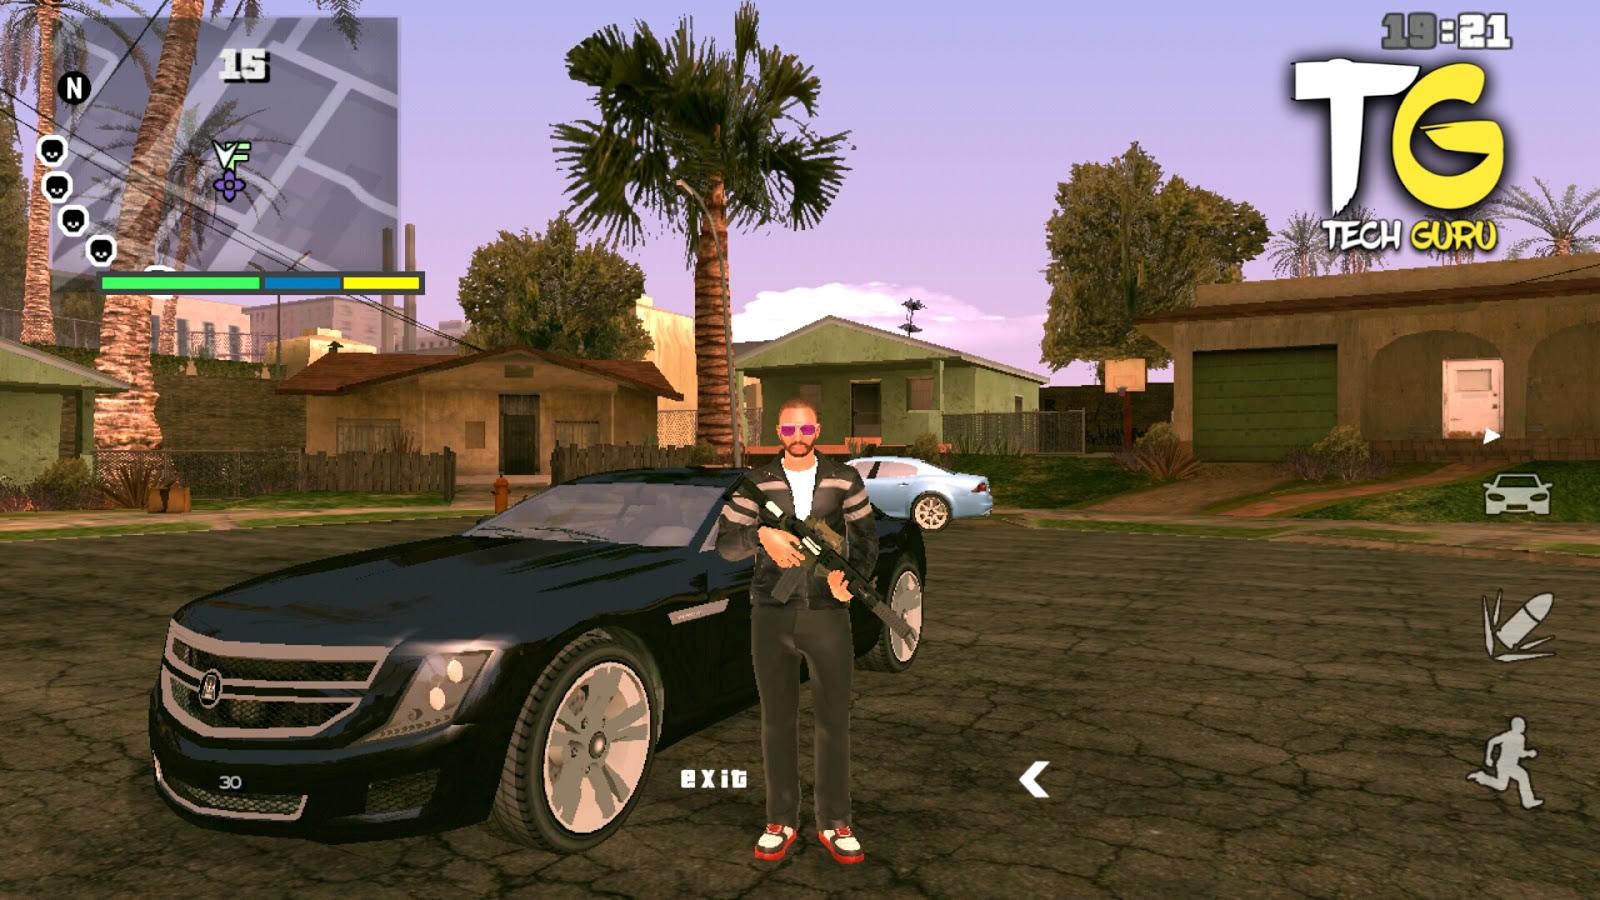 [500MB] GTA 5 LITE MOD FOR ANDROID GamerKing